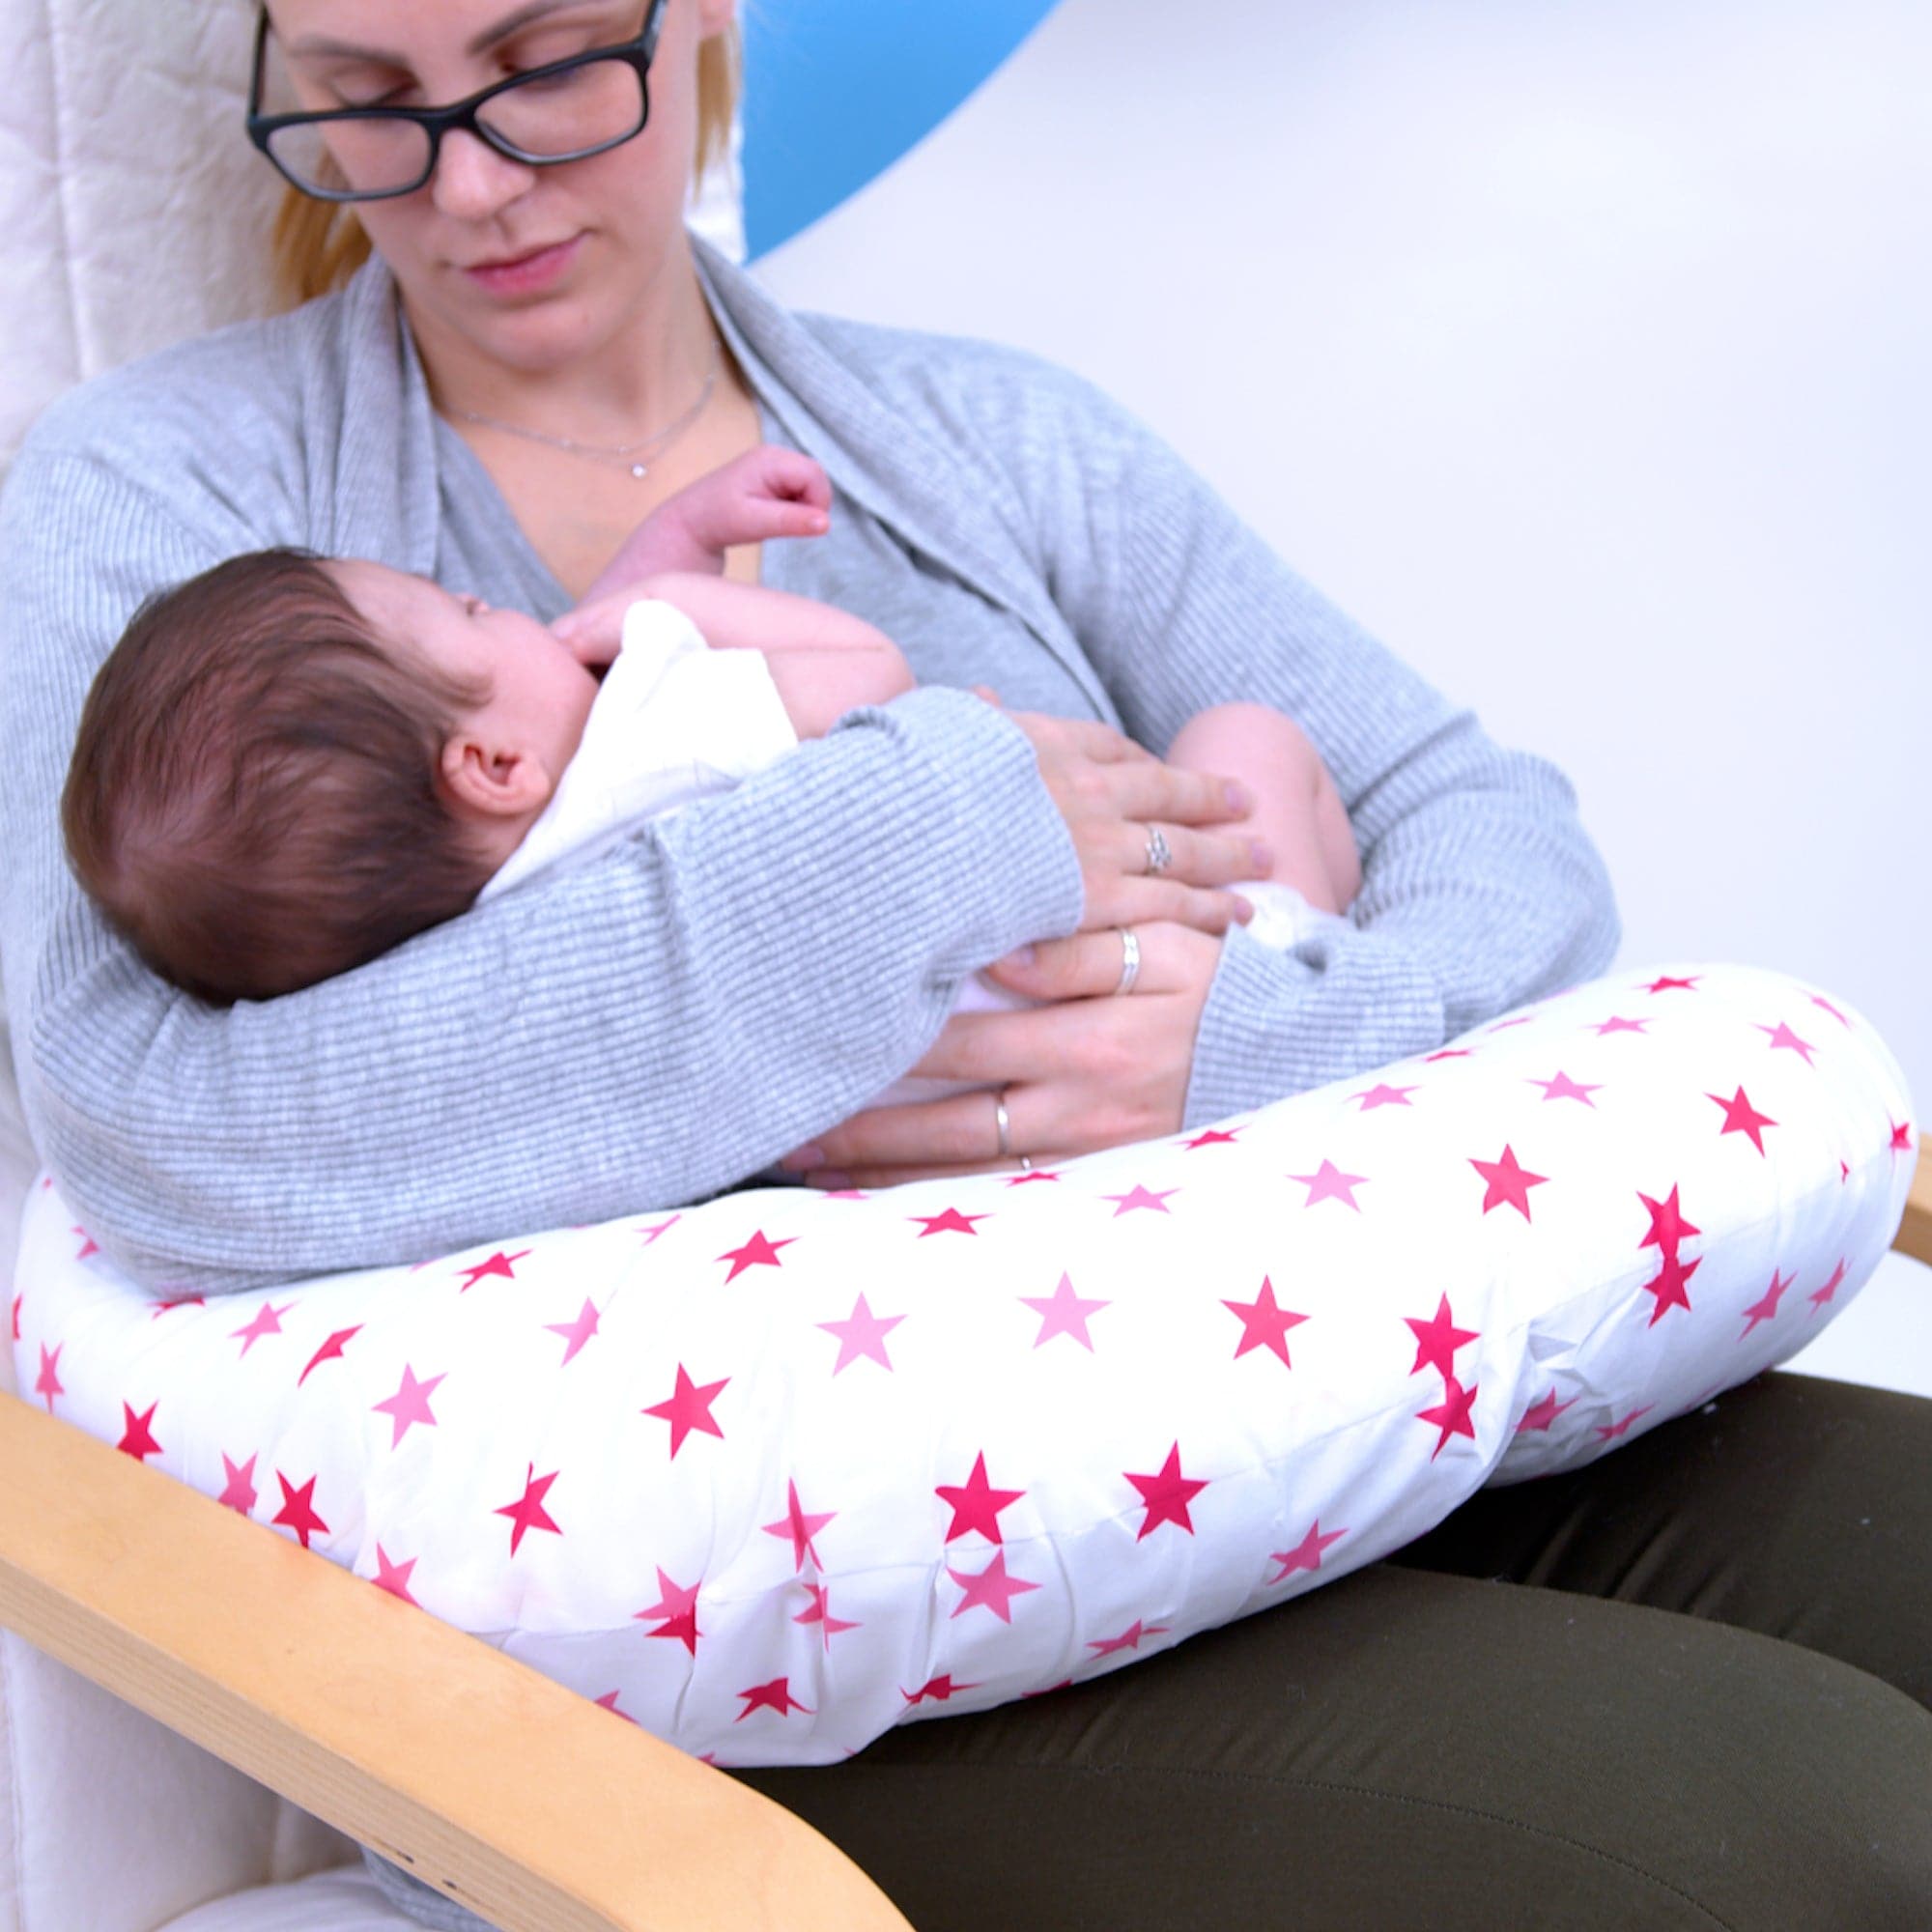 Breast Feeding Nursing Pillow - Little Pink Star (COVER ONLY) - For Your Little One